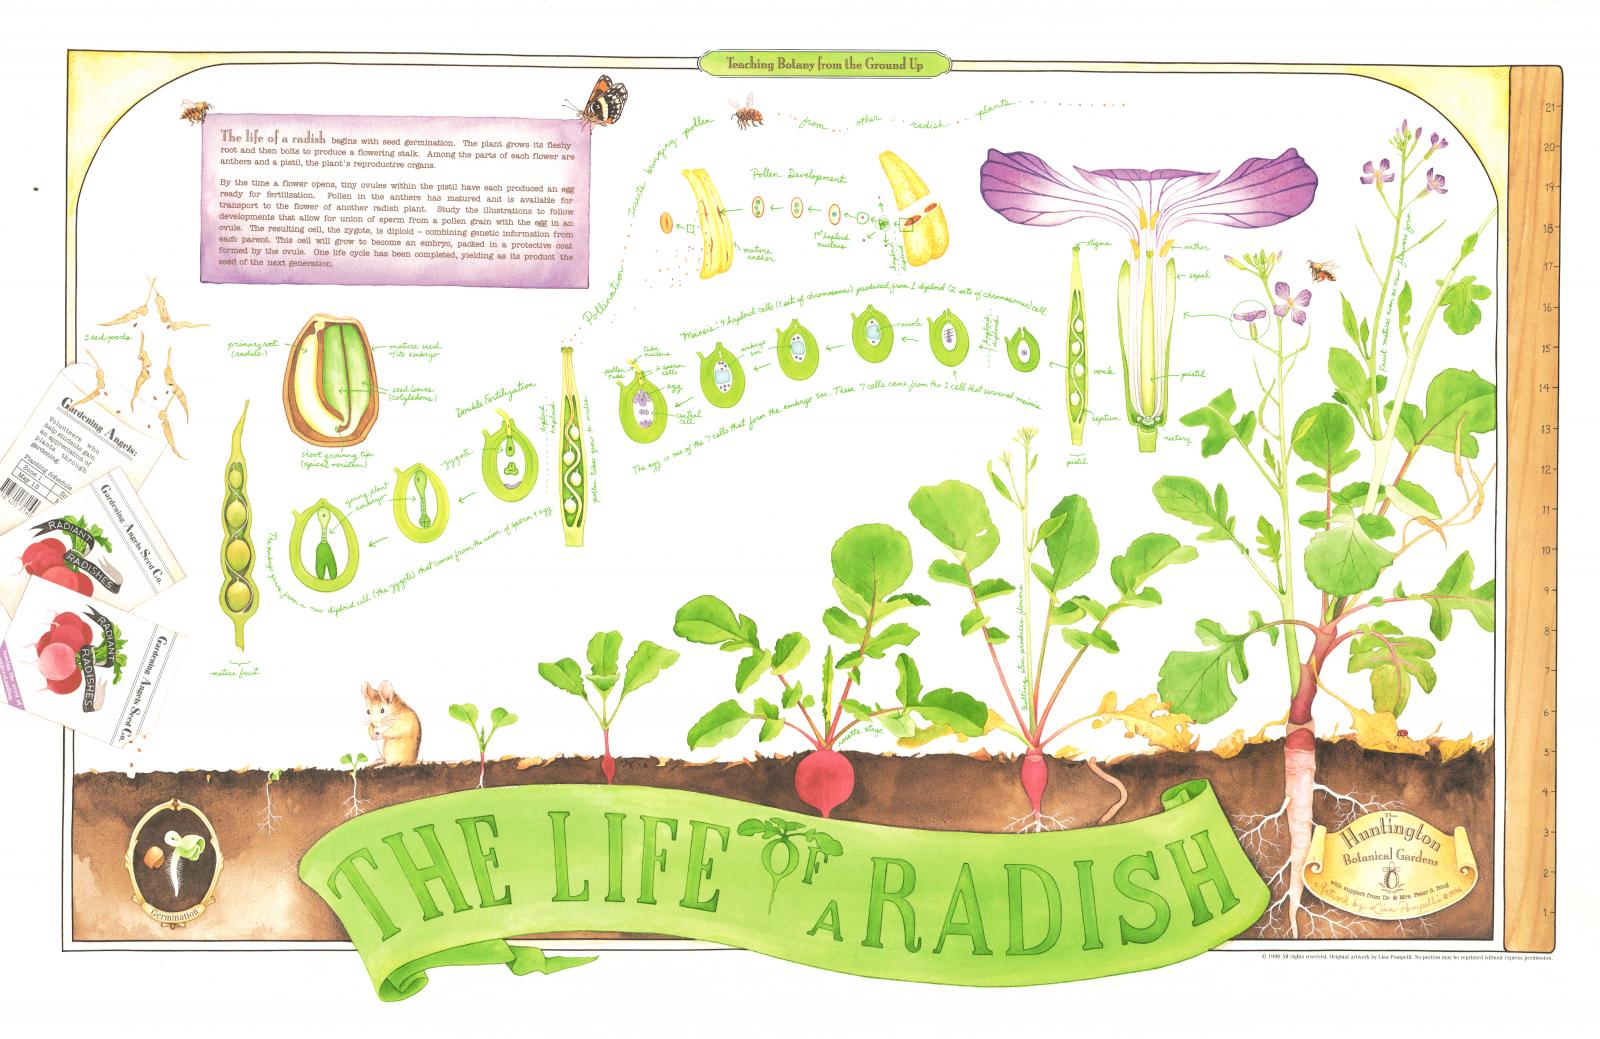 Poster of a radish going through growth stages